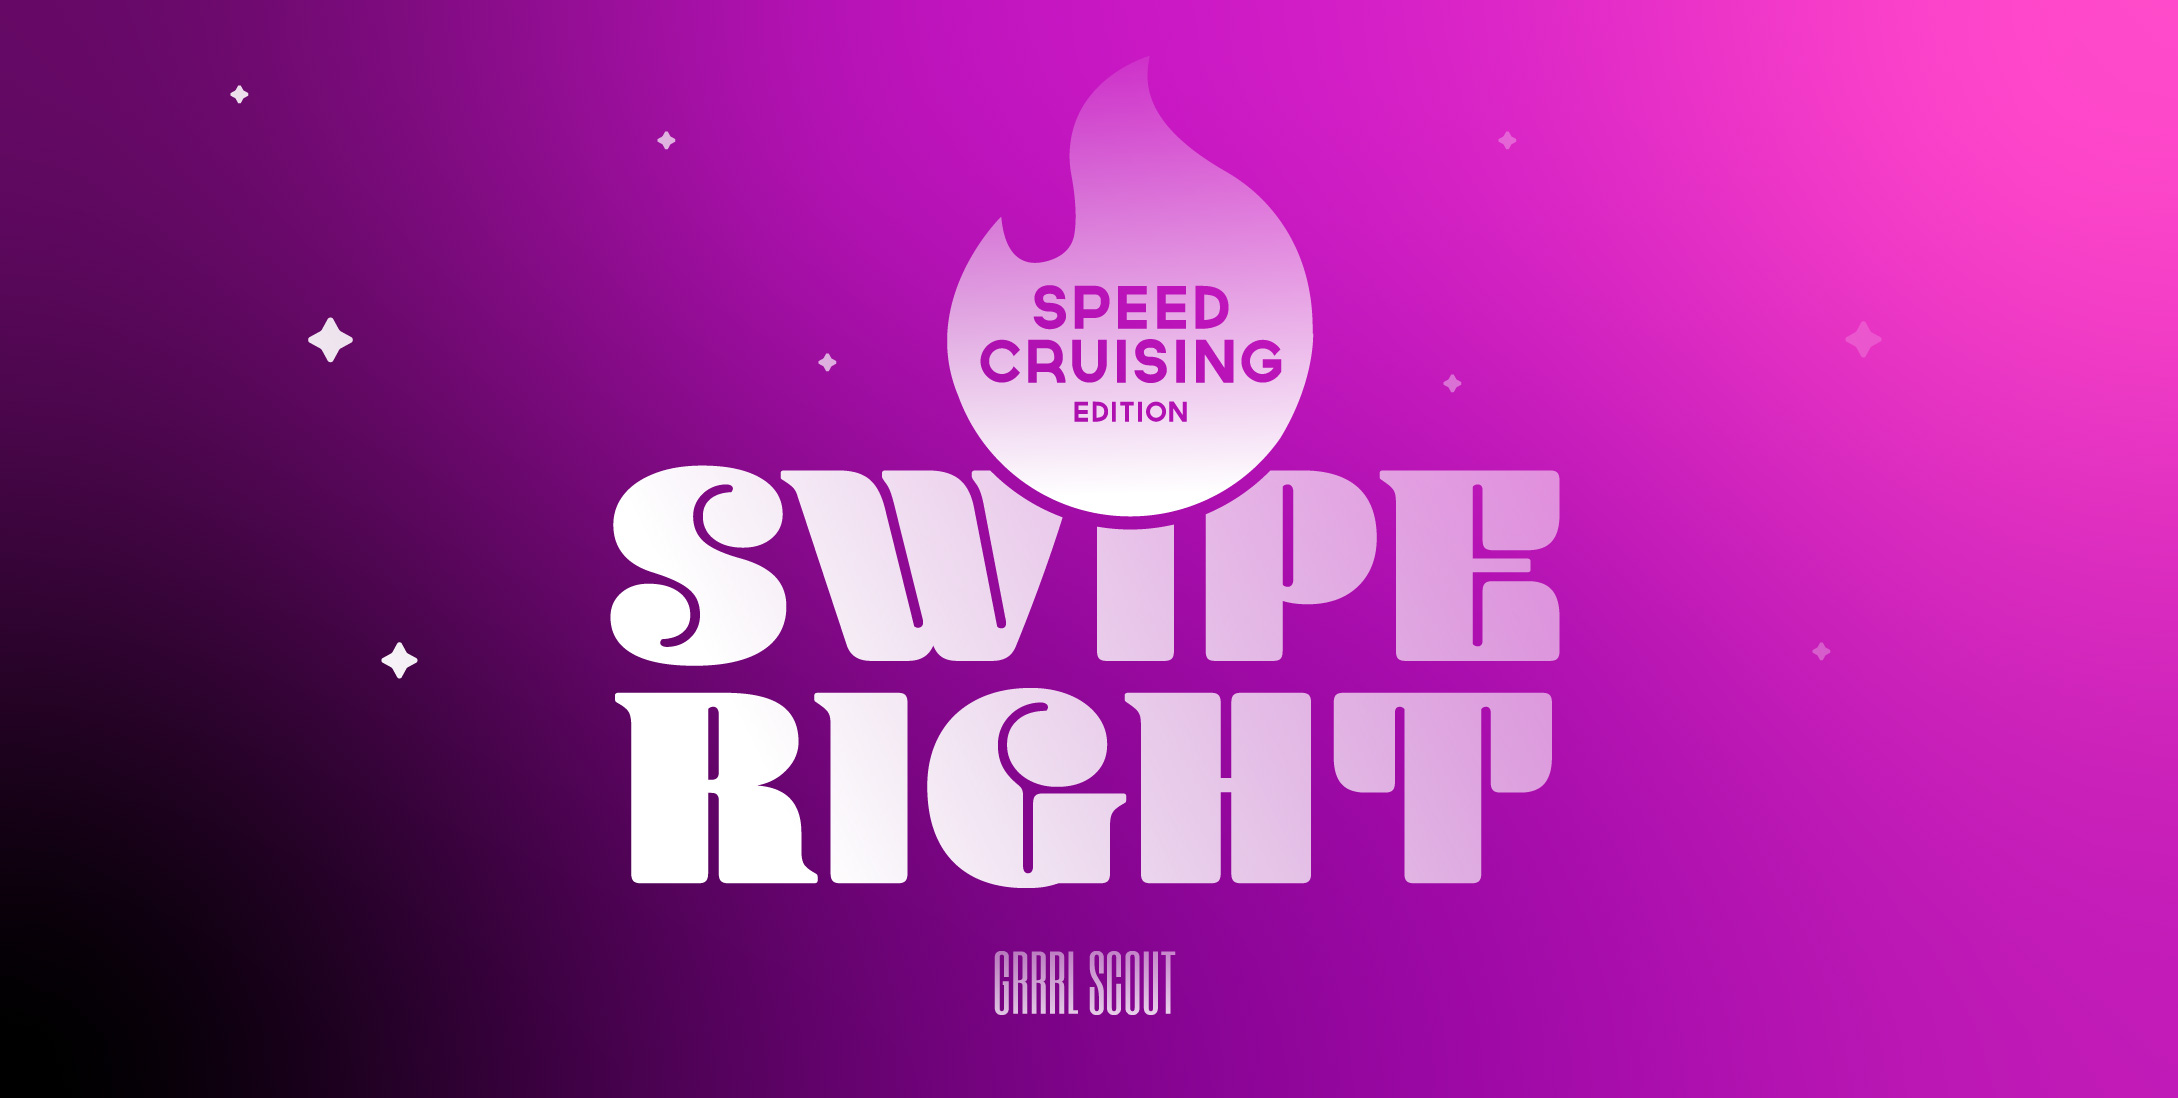 Date: 8/24/2022 (Wednesday) Time: 6:30 p.m. – 11:00 p.m. Parking: Street parking Tickets: (21+ Event) Queer Speed-Cruising + Patio Party $20 + Fees (Limited Tickets Available) Doors: 6:30 p.m./Speed-Cruising: 7:00 – 8:00 p.m. Patio Party $14 + Fees (Patio Party Only) $20 + Fees (Day of) Doors: 8:15 – 11:00 p.m. Entrance: North Side - Alley Entrance Music: DJ Chico Chi 6:30 p.m. - 8:00 p.m. Speed-Cruising 8:15 p.m.. - 11:00 p.m. Patio Party